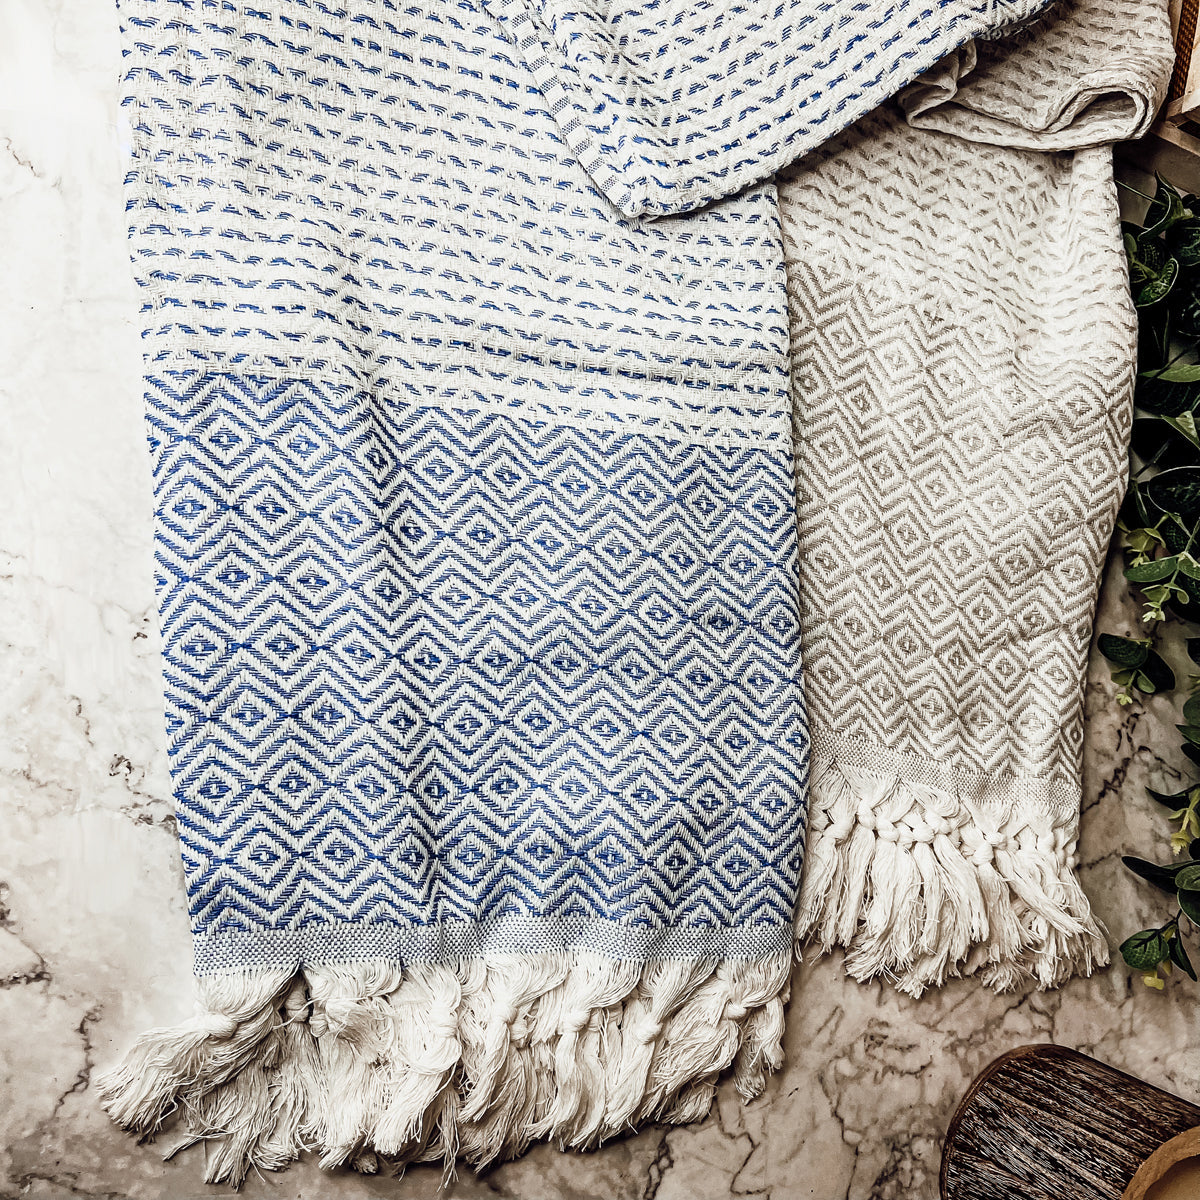 Peshtemal Bath Towel Collection - Blue and Gray Tassel Towels made from Cotton